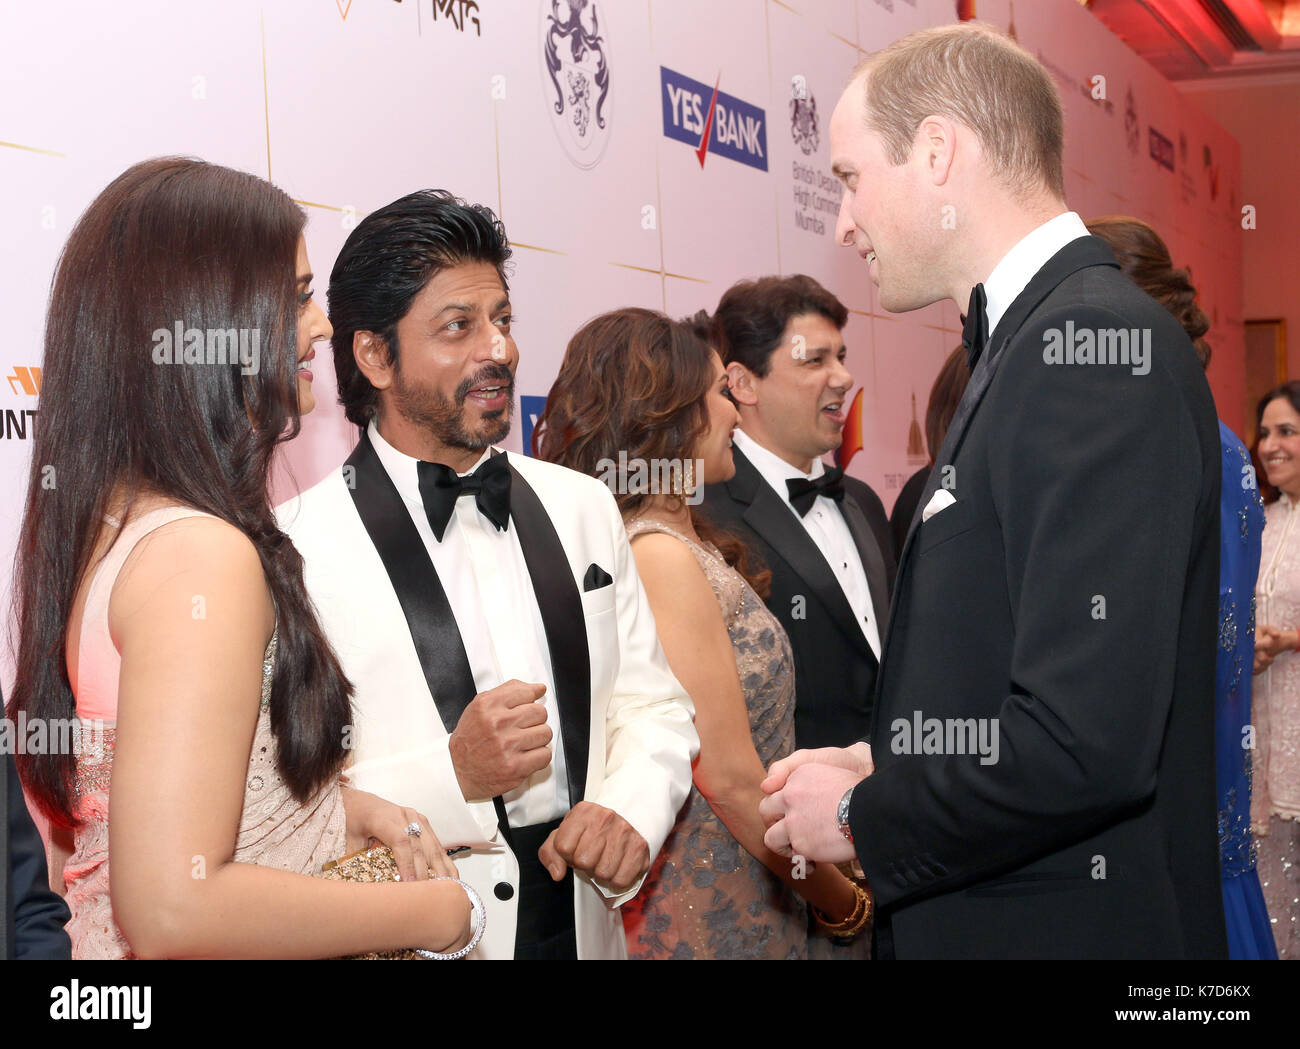 Photo Must Be Credited ©Alpha Press 065630 10/04/2016 Prince William Duke of Cambridge chats to Aishwarya Rai Bachchan and Shah Rukh Khan with Shriram Nene and Madhuri Dixit at a Gala Dinner and reception with Bollywood stars and figures from the business world in Mumbai, India Stock Photo